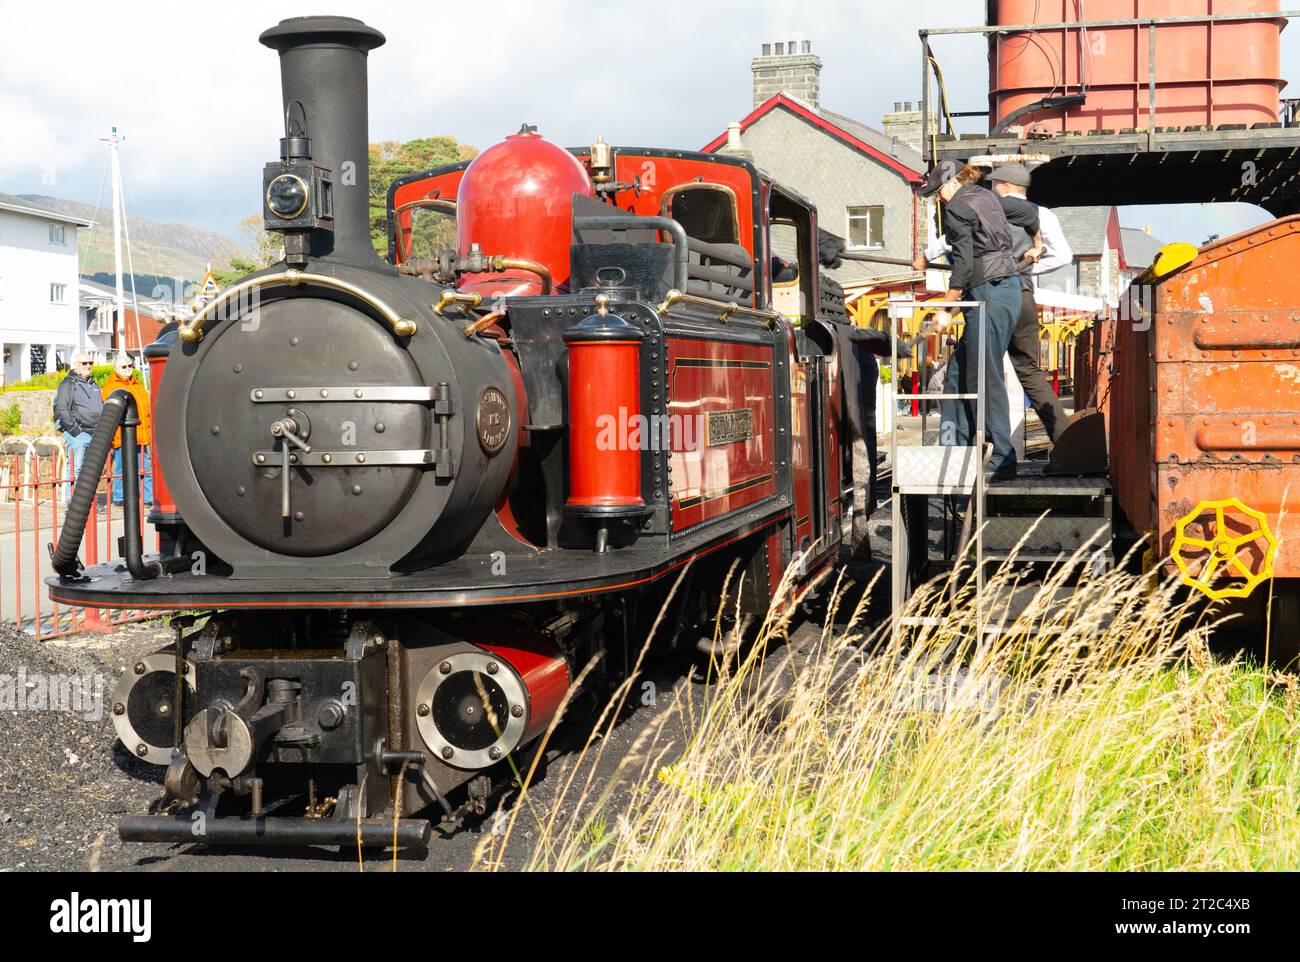 The David Lloyd George steam engine of the Ffestiniog Railway, being refuelled in Porthmadog Harbour Station, in Oct 23. Note the female Stoker. Stock Photo